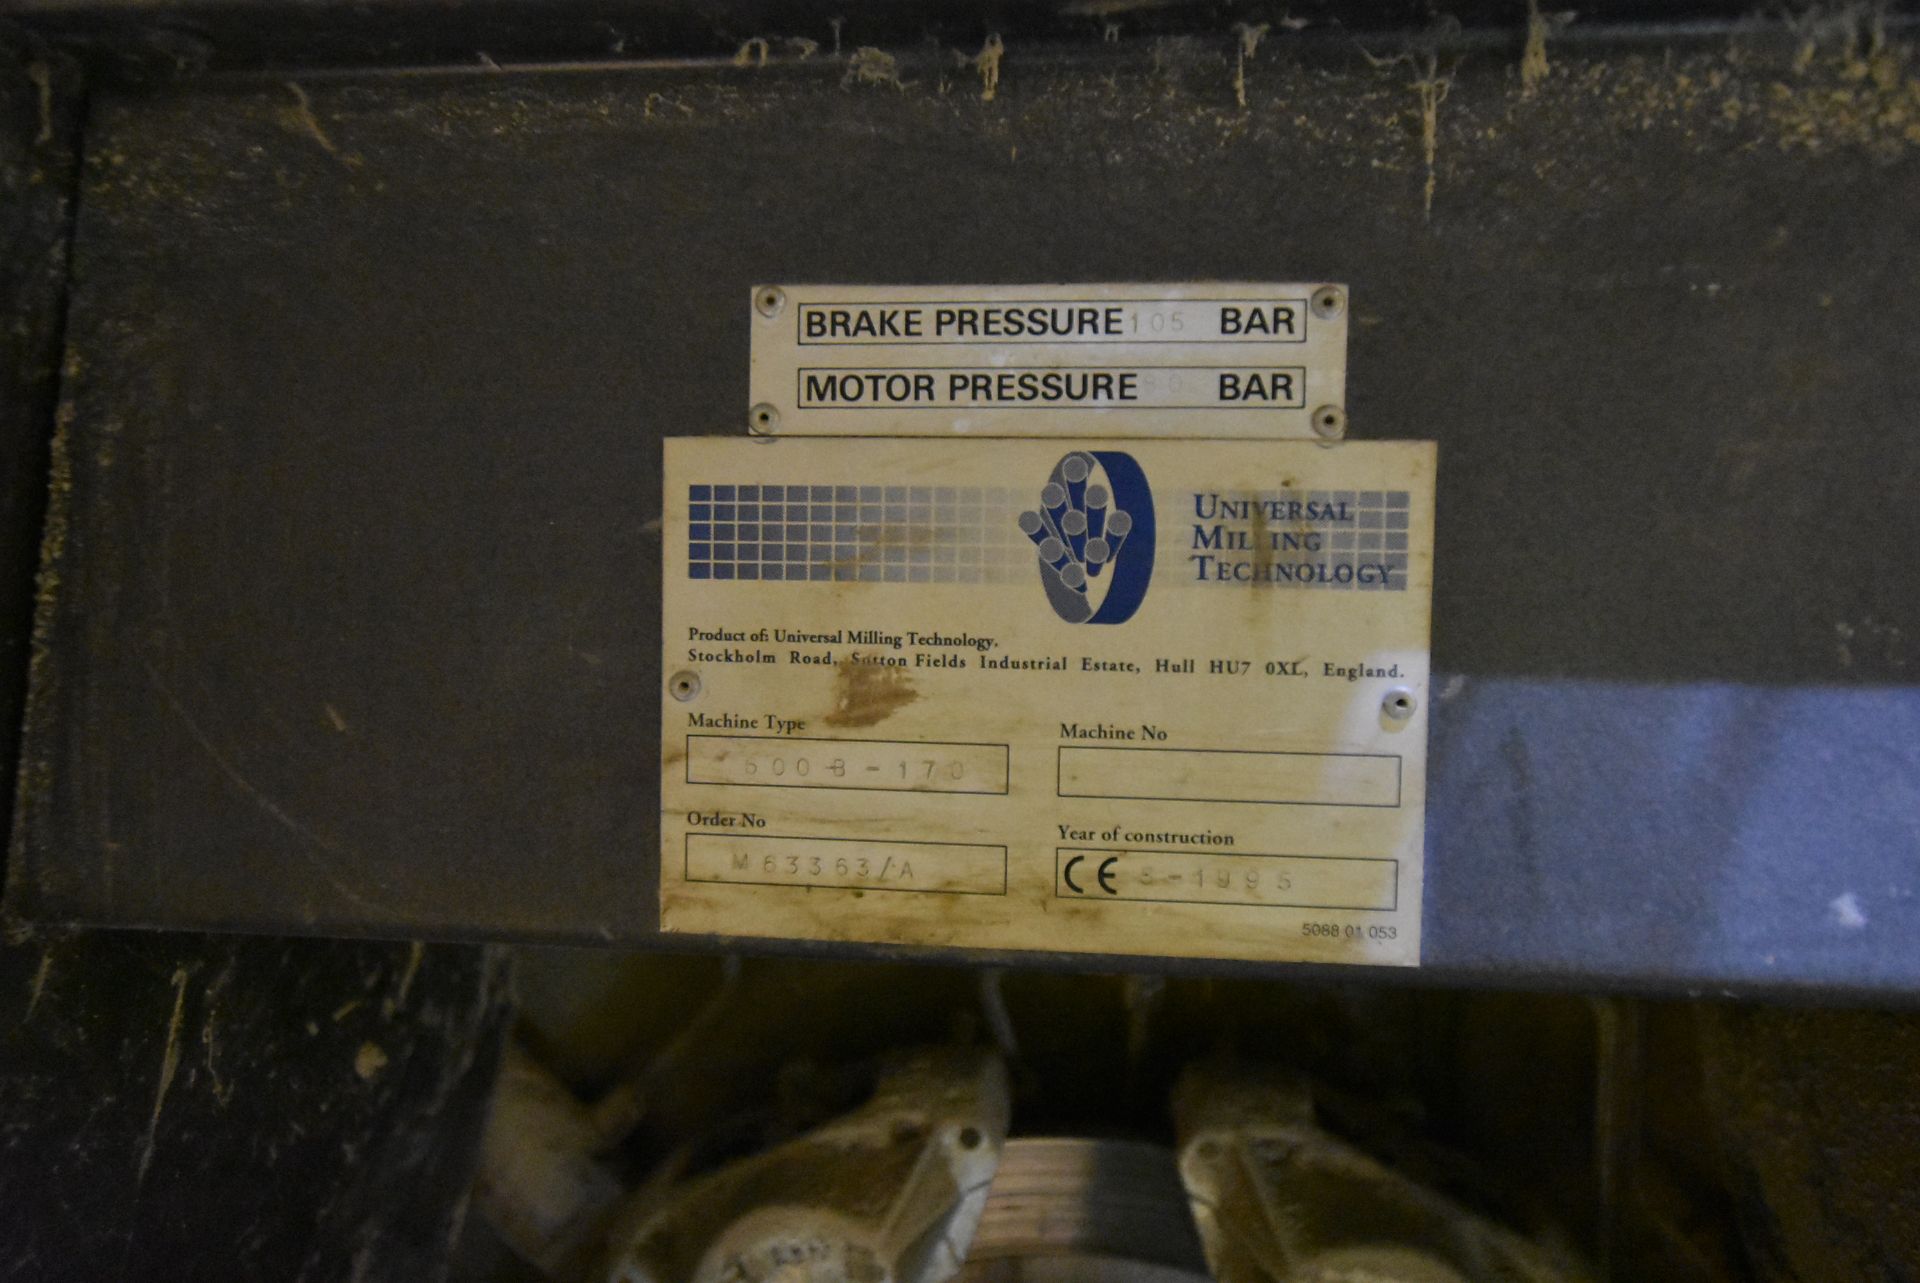 UMT Paladin 600B-170 PELLETING PRESS, serial no. M63363/A, year of manufacture 1995, with Brook - Image 4 of 7